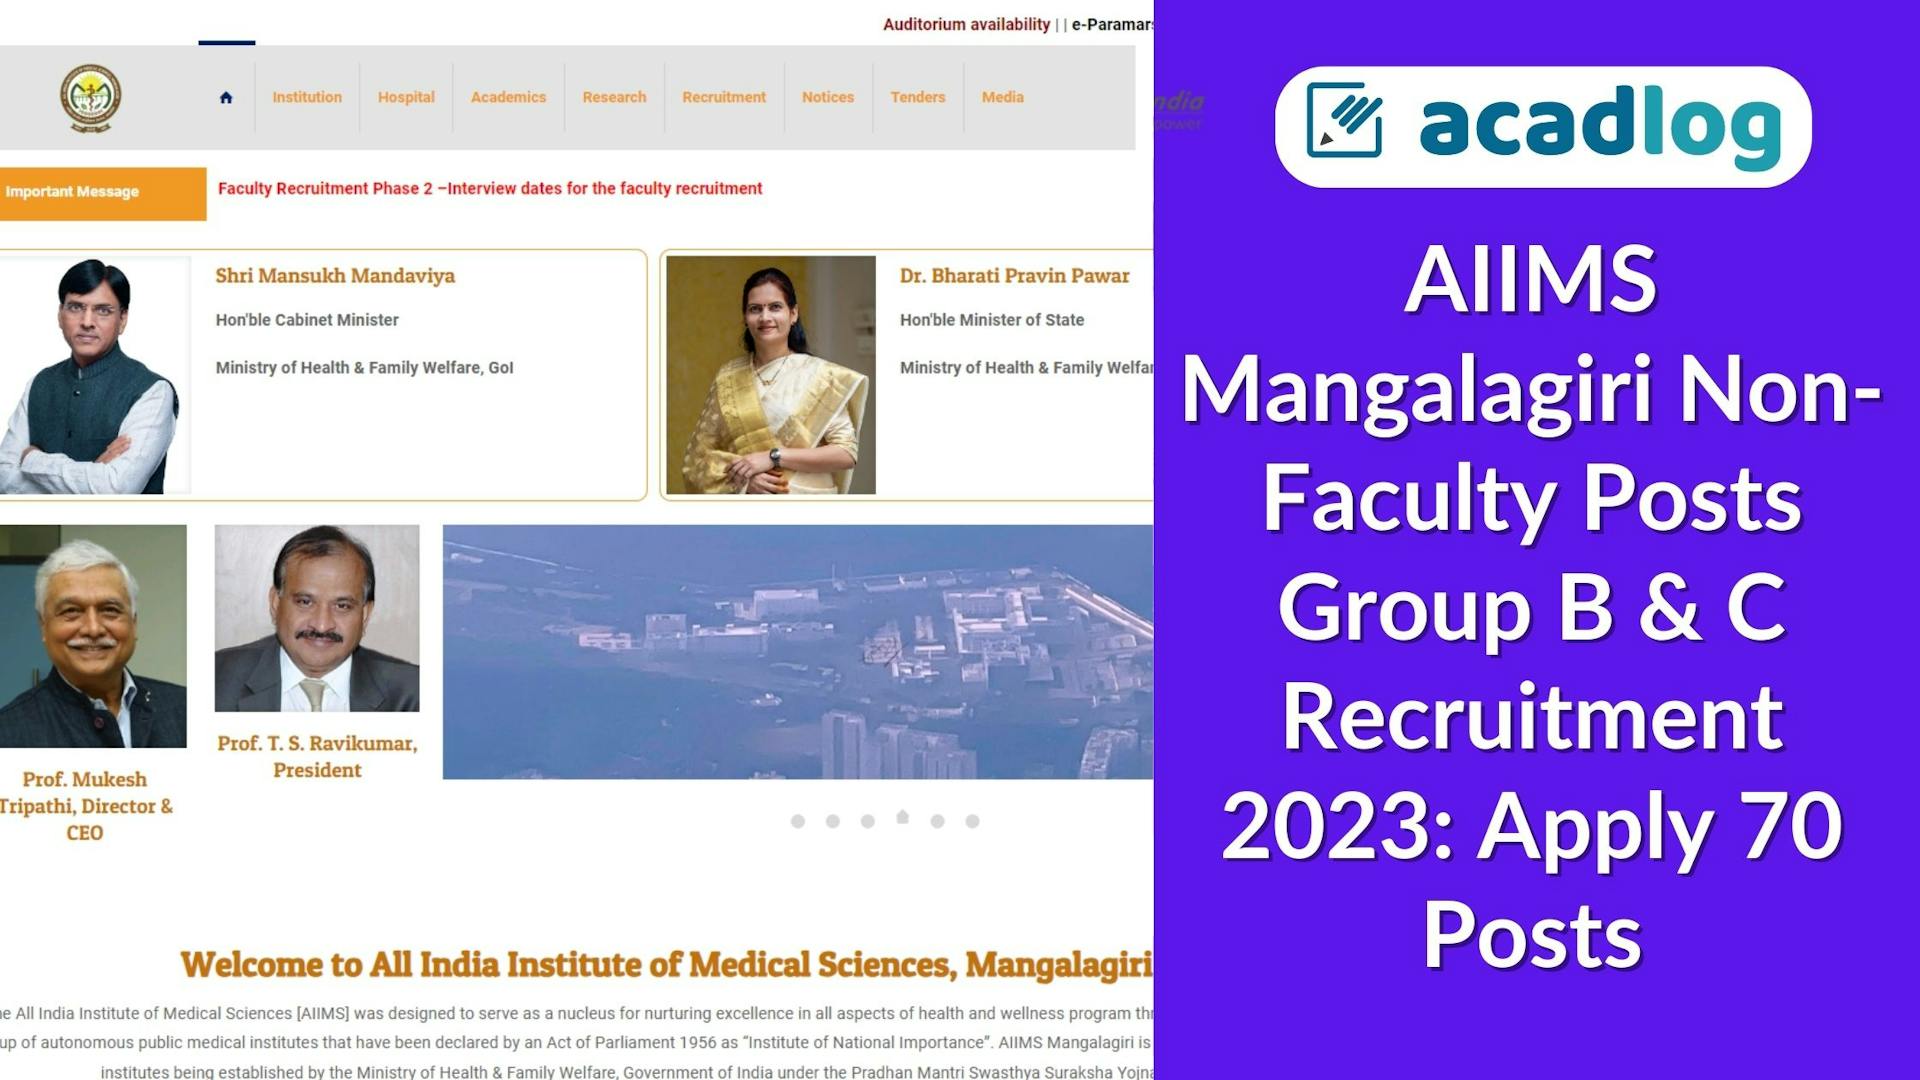 AIIMS Mangalagiri Non-Faculty Posts Group B & C Recruitment 2023: Apply 70 Posts